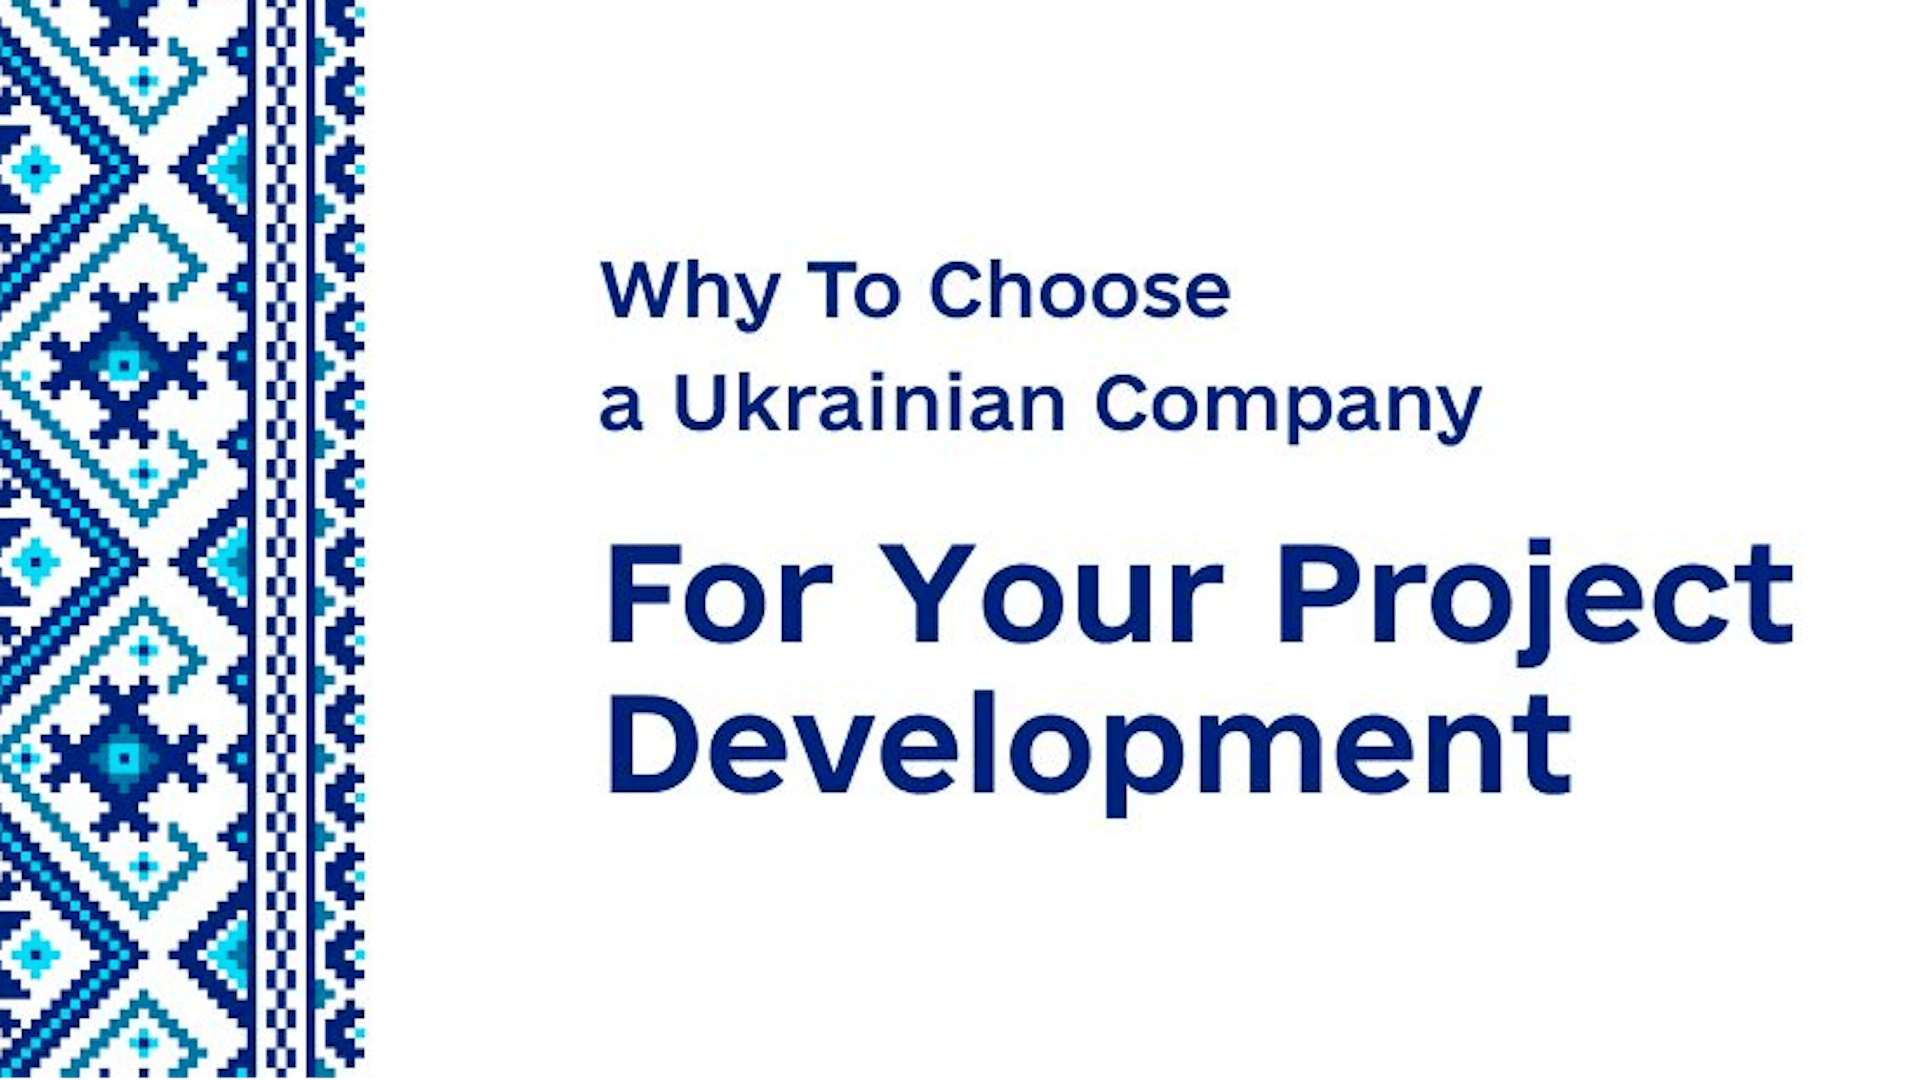 featured image - Why To Choose a Ukrainian Company For Your Project Development